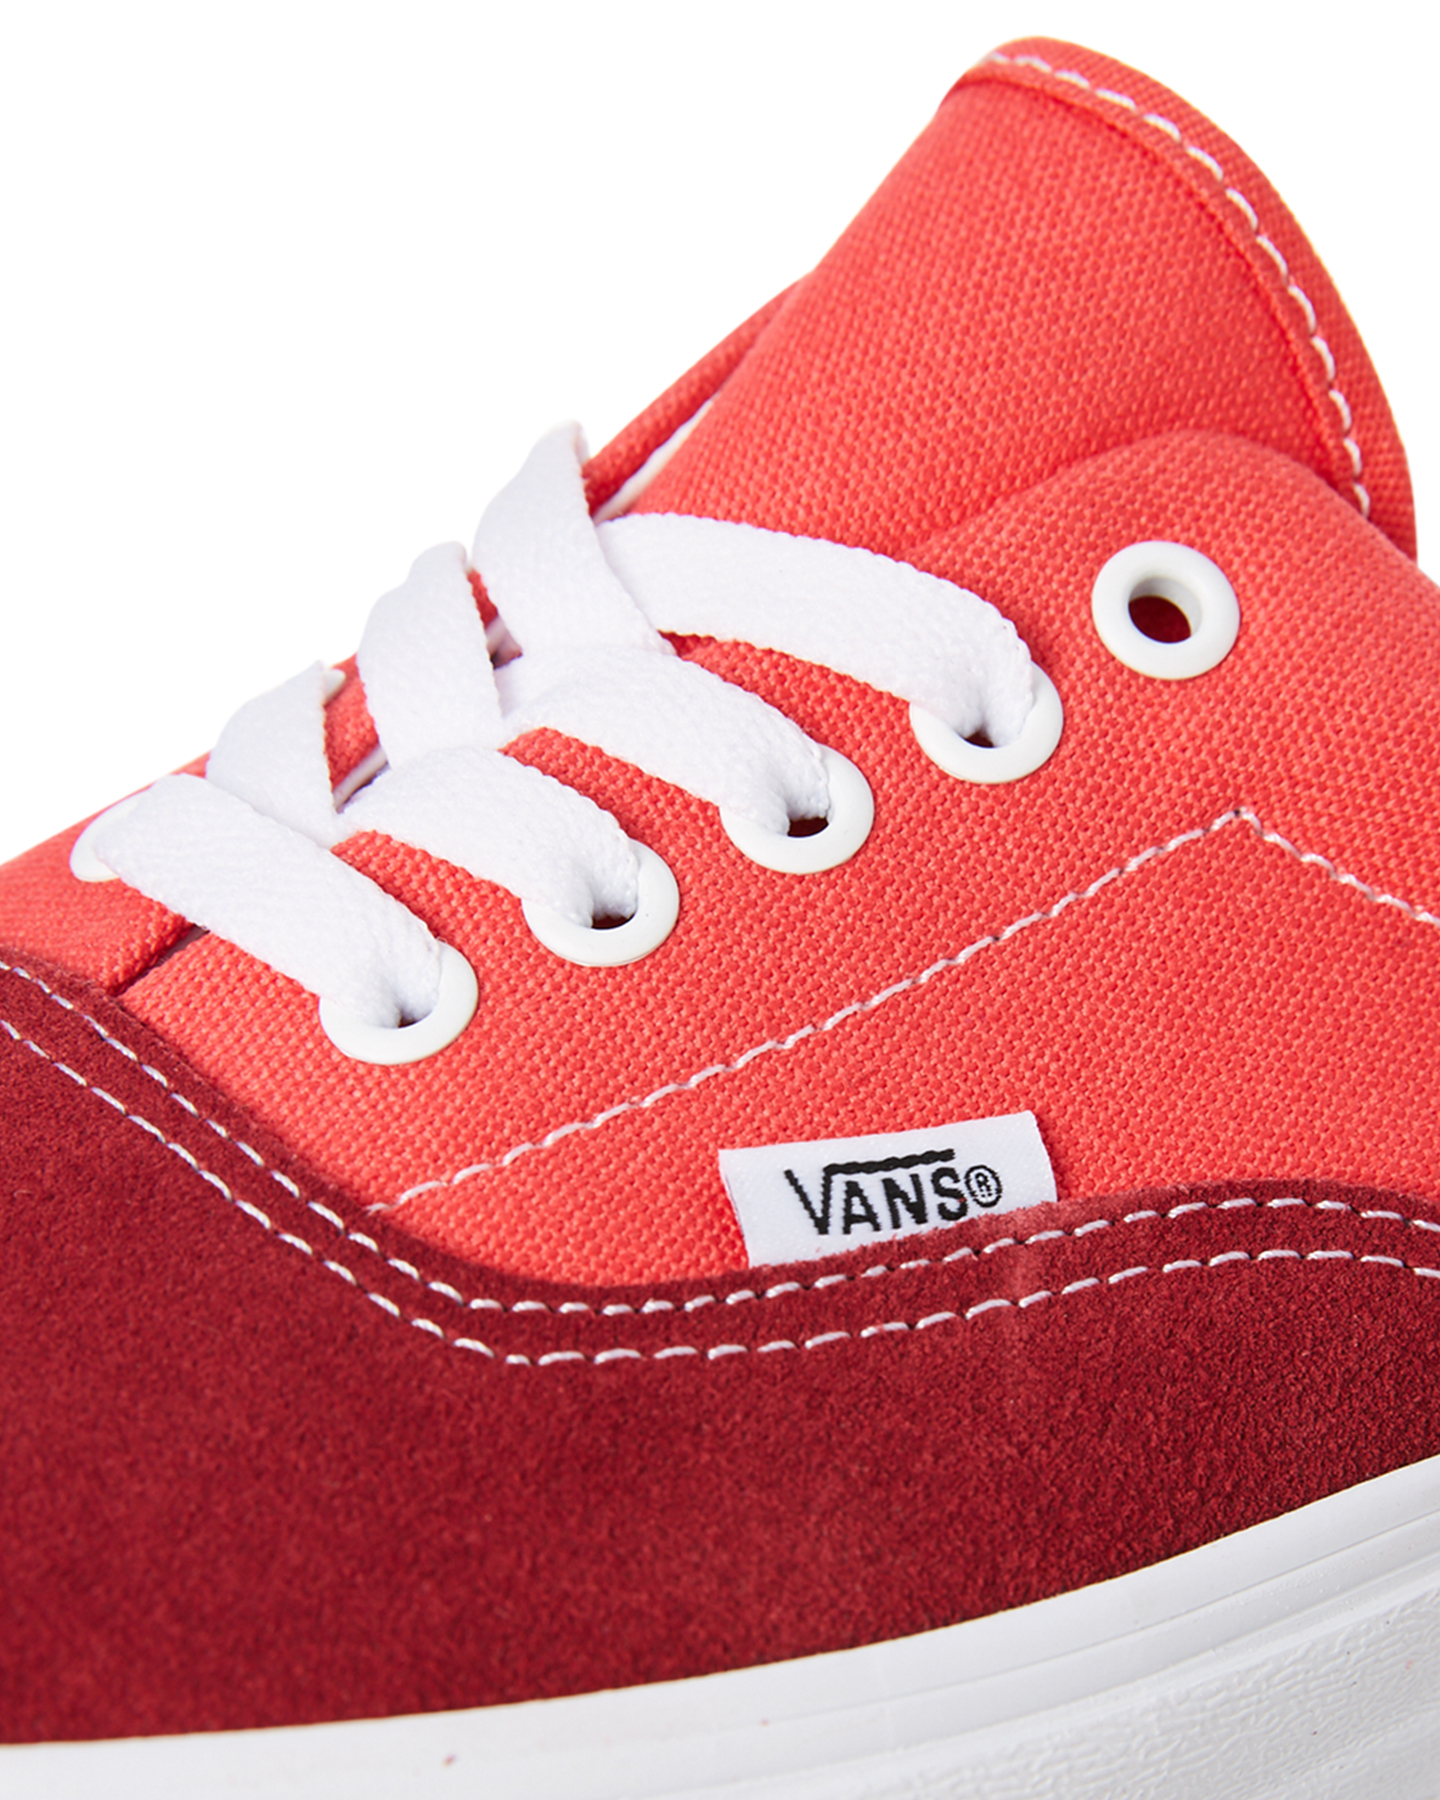 Vans Womens Era Shoe - Red | SurfStitch
 Red Vans Shoes For Girls